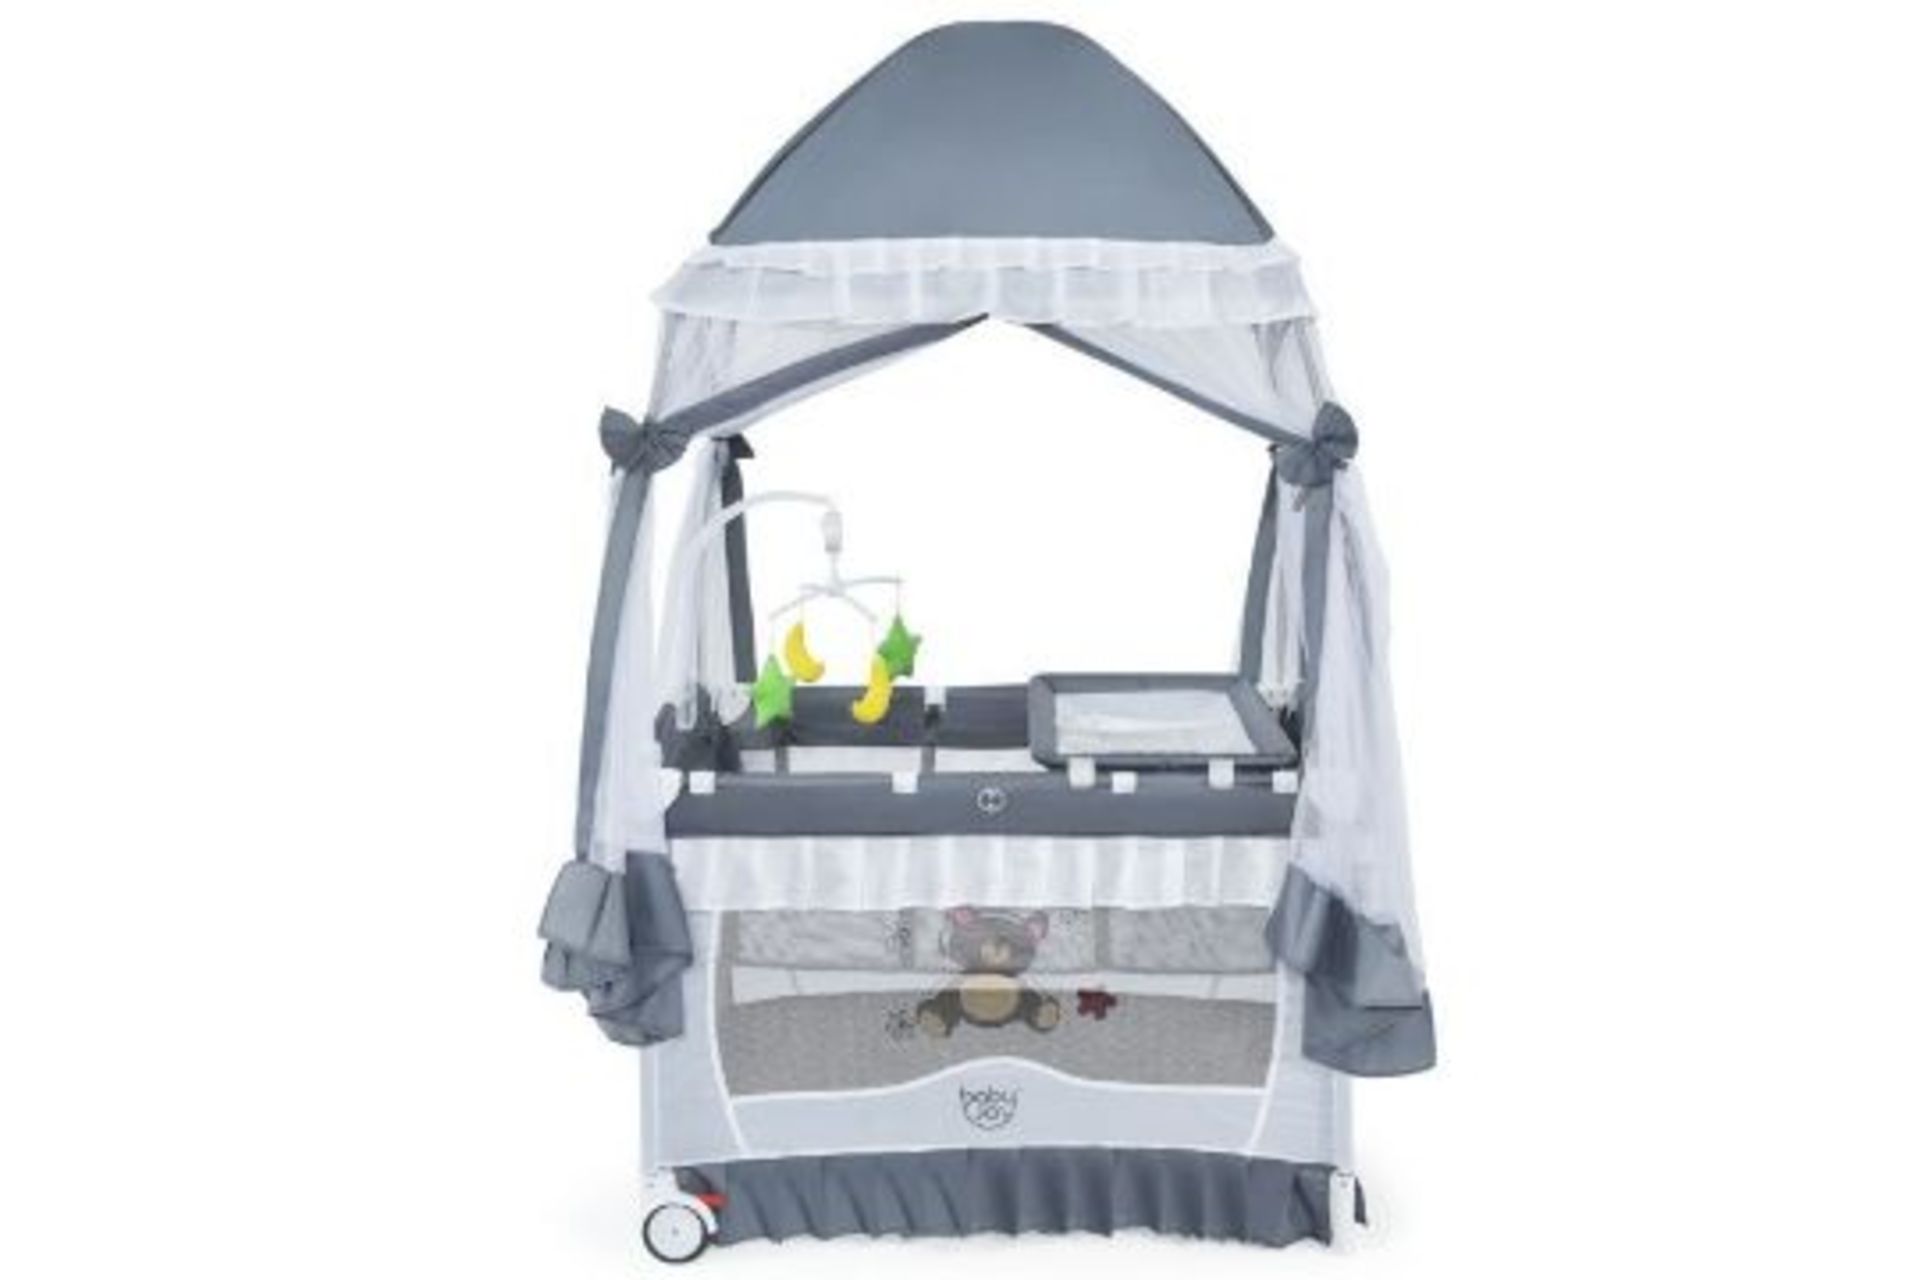 4 in 1 Convertible Baby Bed with Detachable Canopy and Changing Table. - R14.3. The foldable